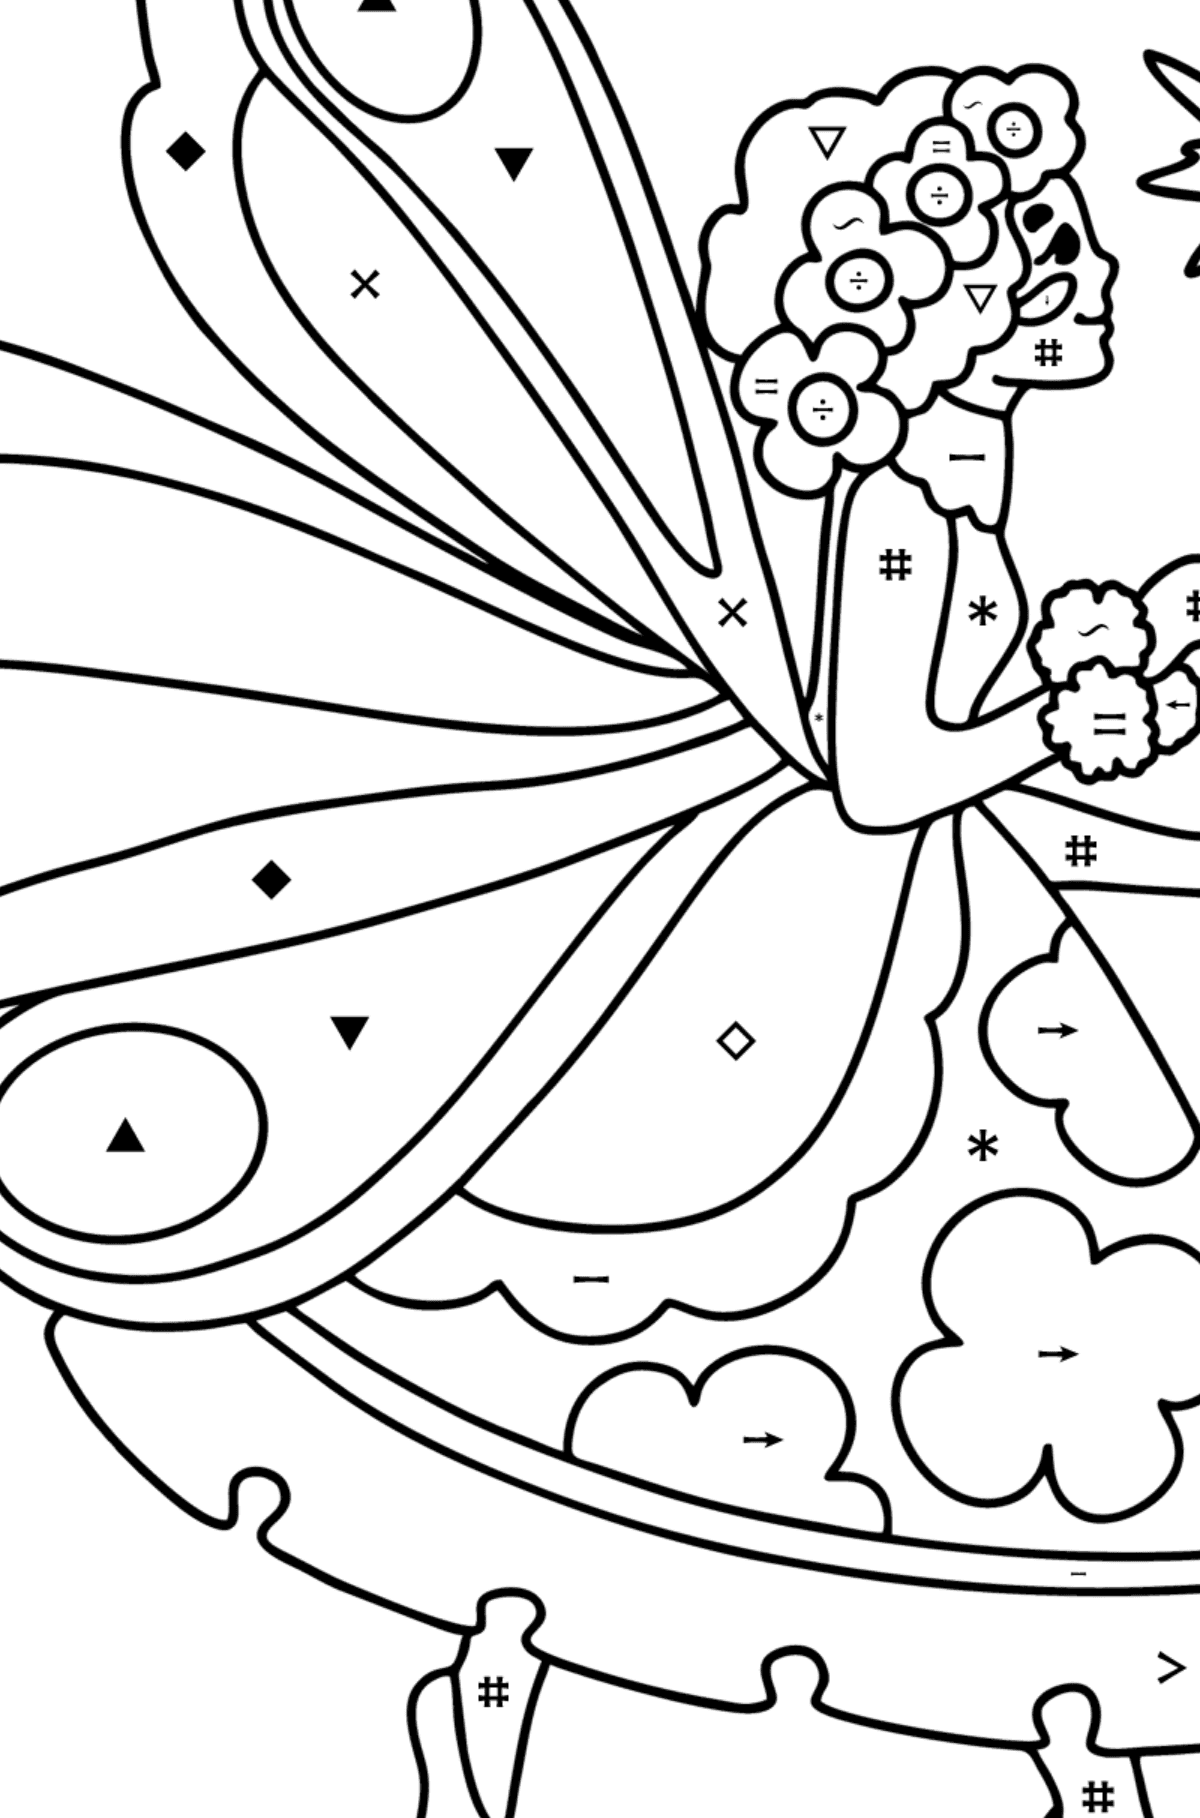 Kind fairy coloring page - Coloring by Symbols for Kids